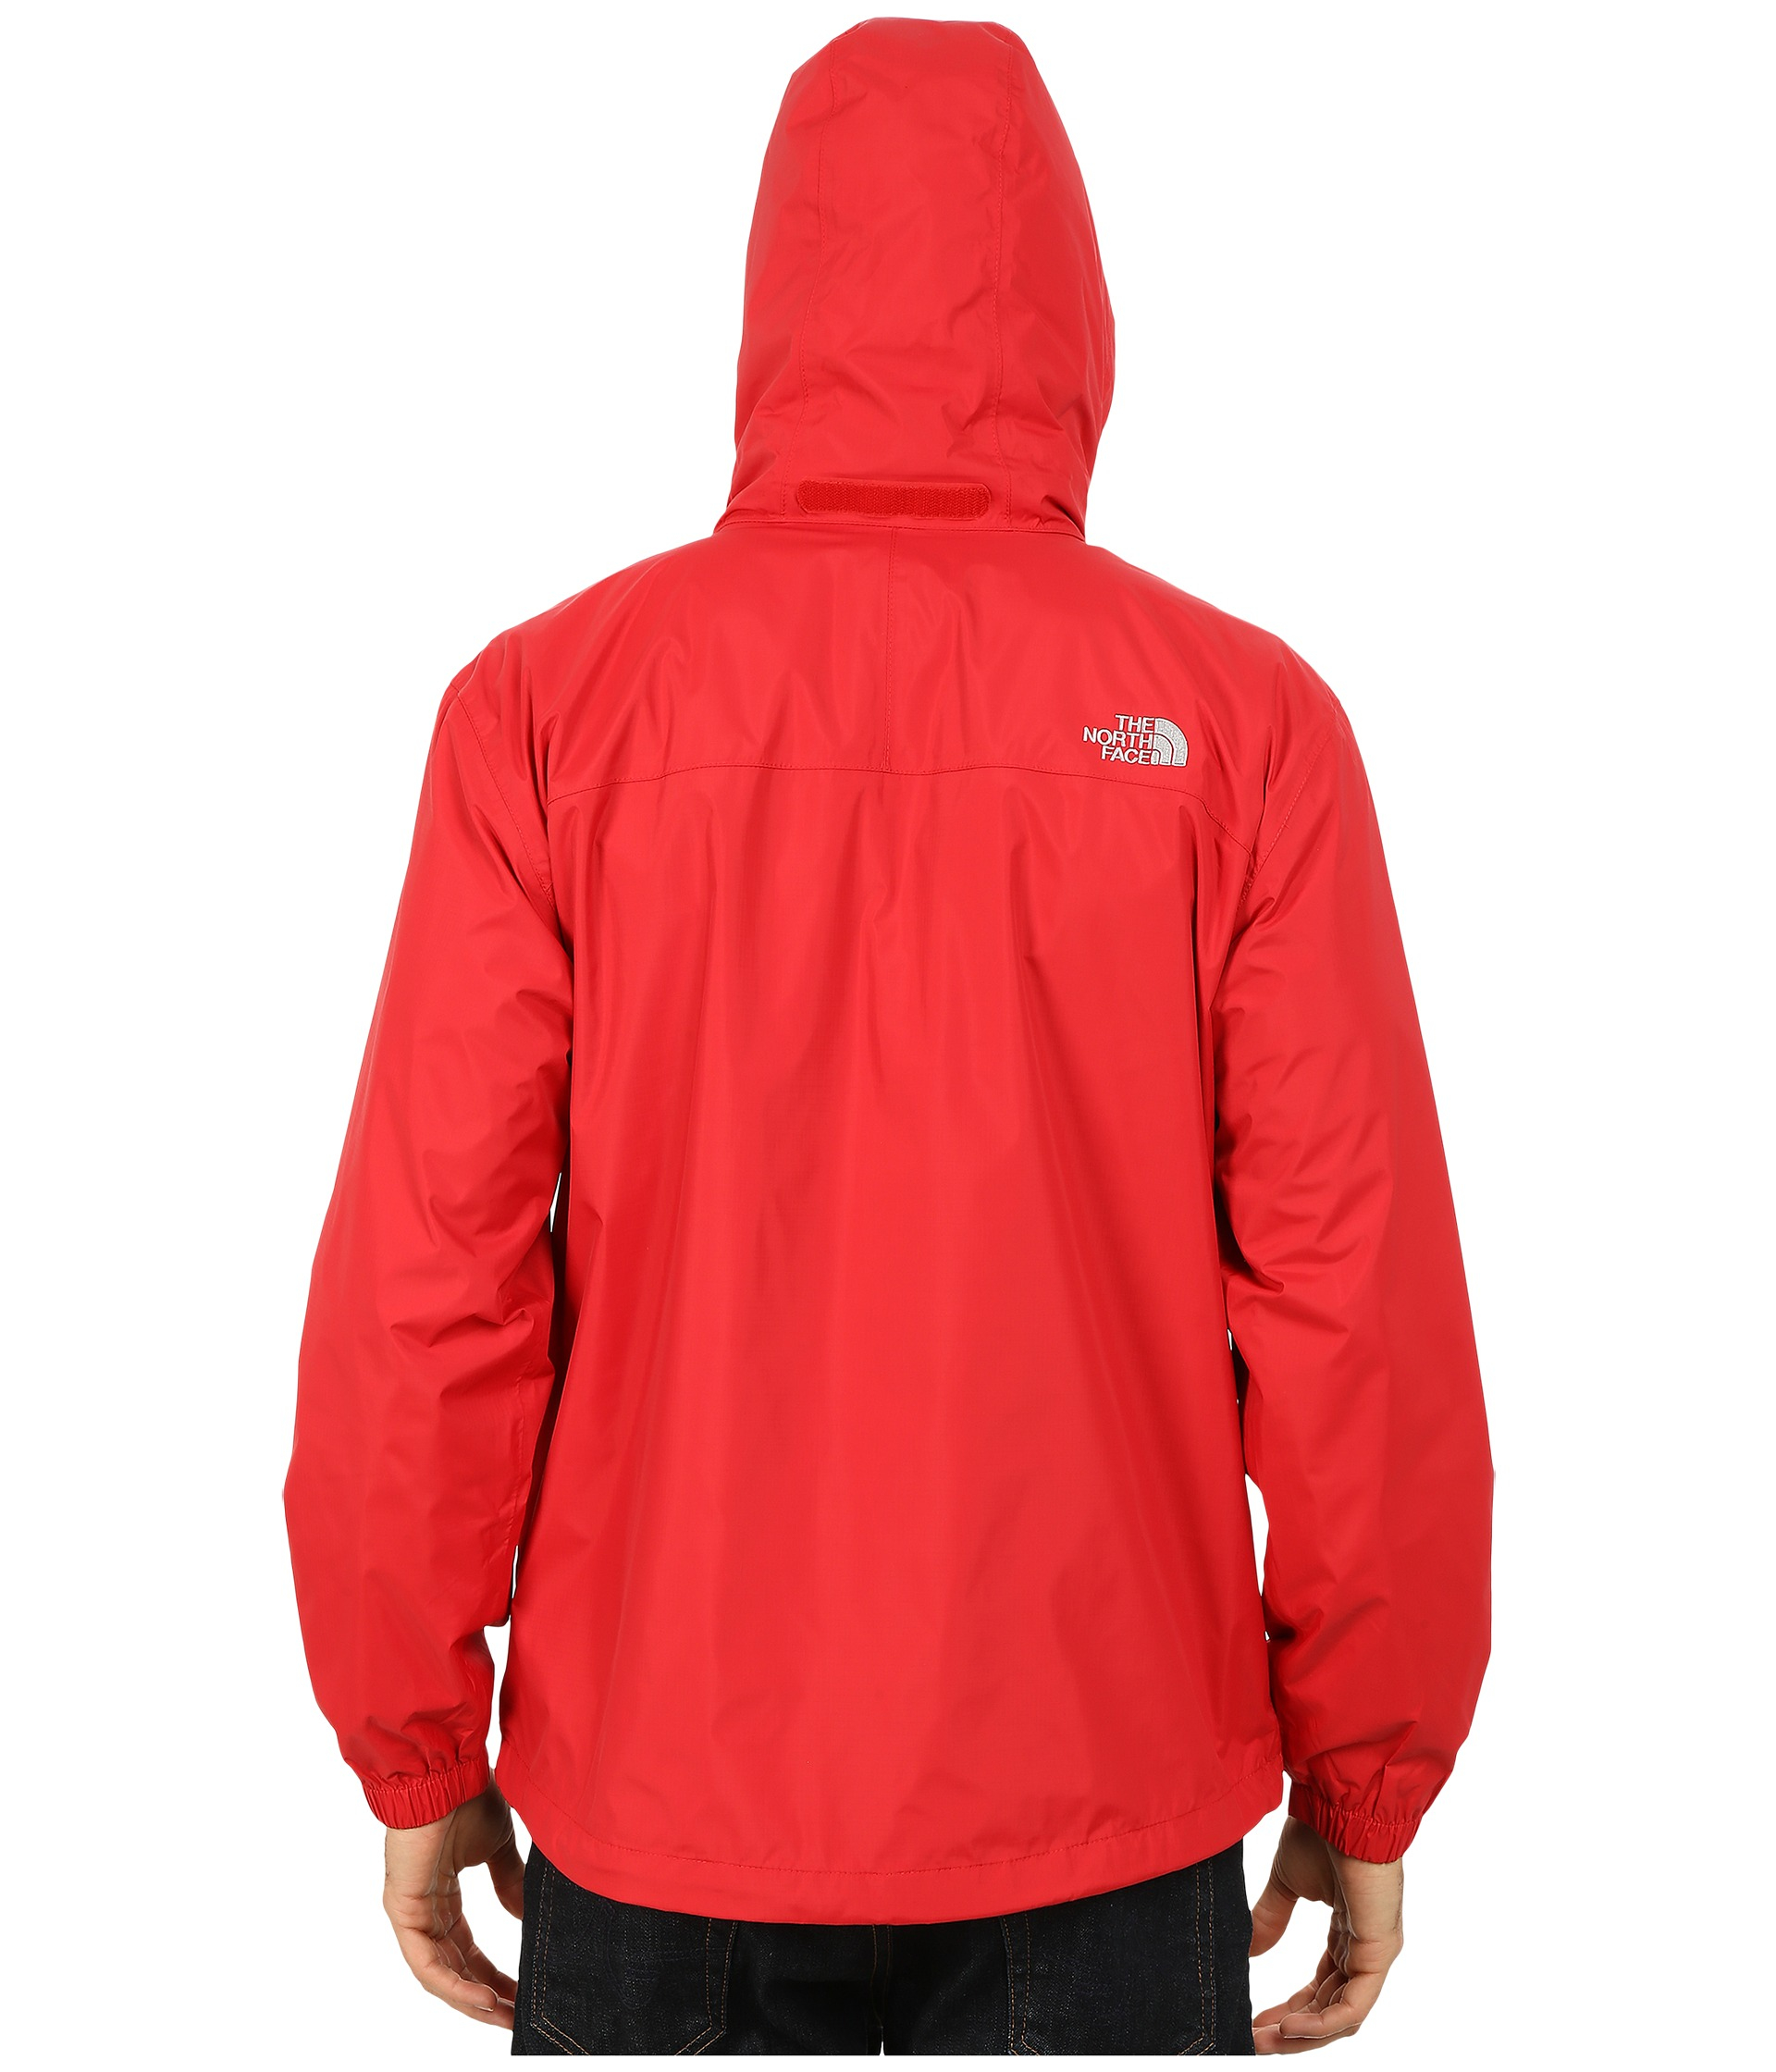 Lyst - The North Face Resolve Jacket in Red for Men